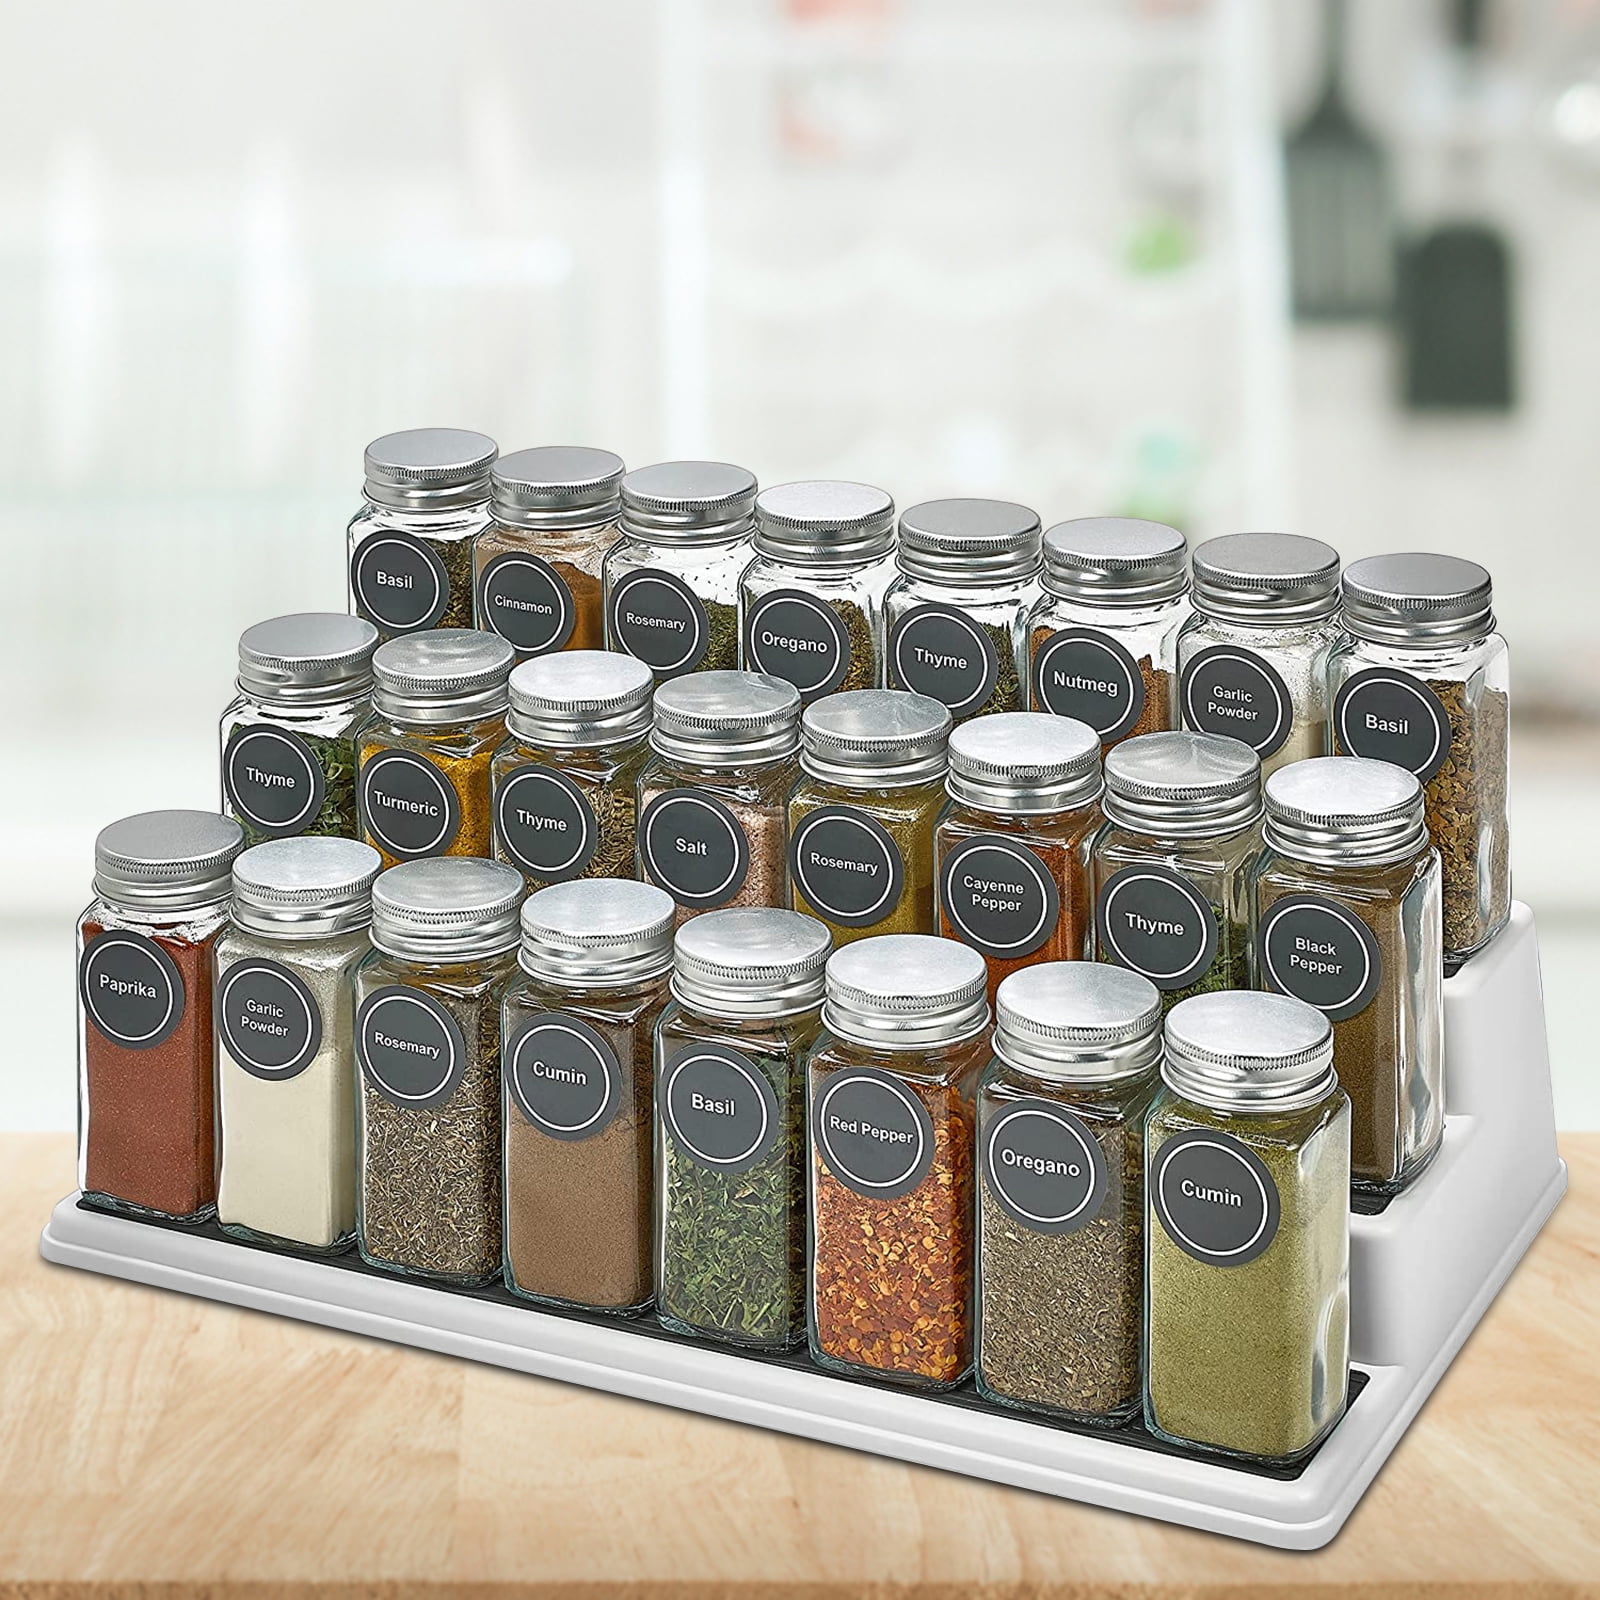 Yangbaga 24Pcs Glass Spice Jars with Labels，4oz Empty Square Spice Bottles  with acacia wood lid & Shaker Lids and Silicone Collapsible Funnel Included